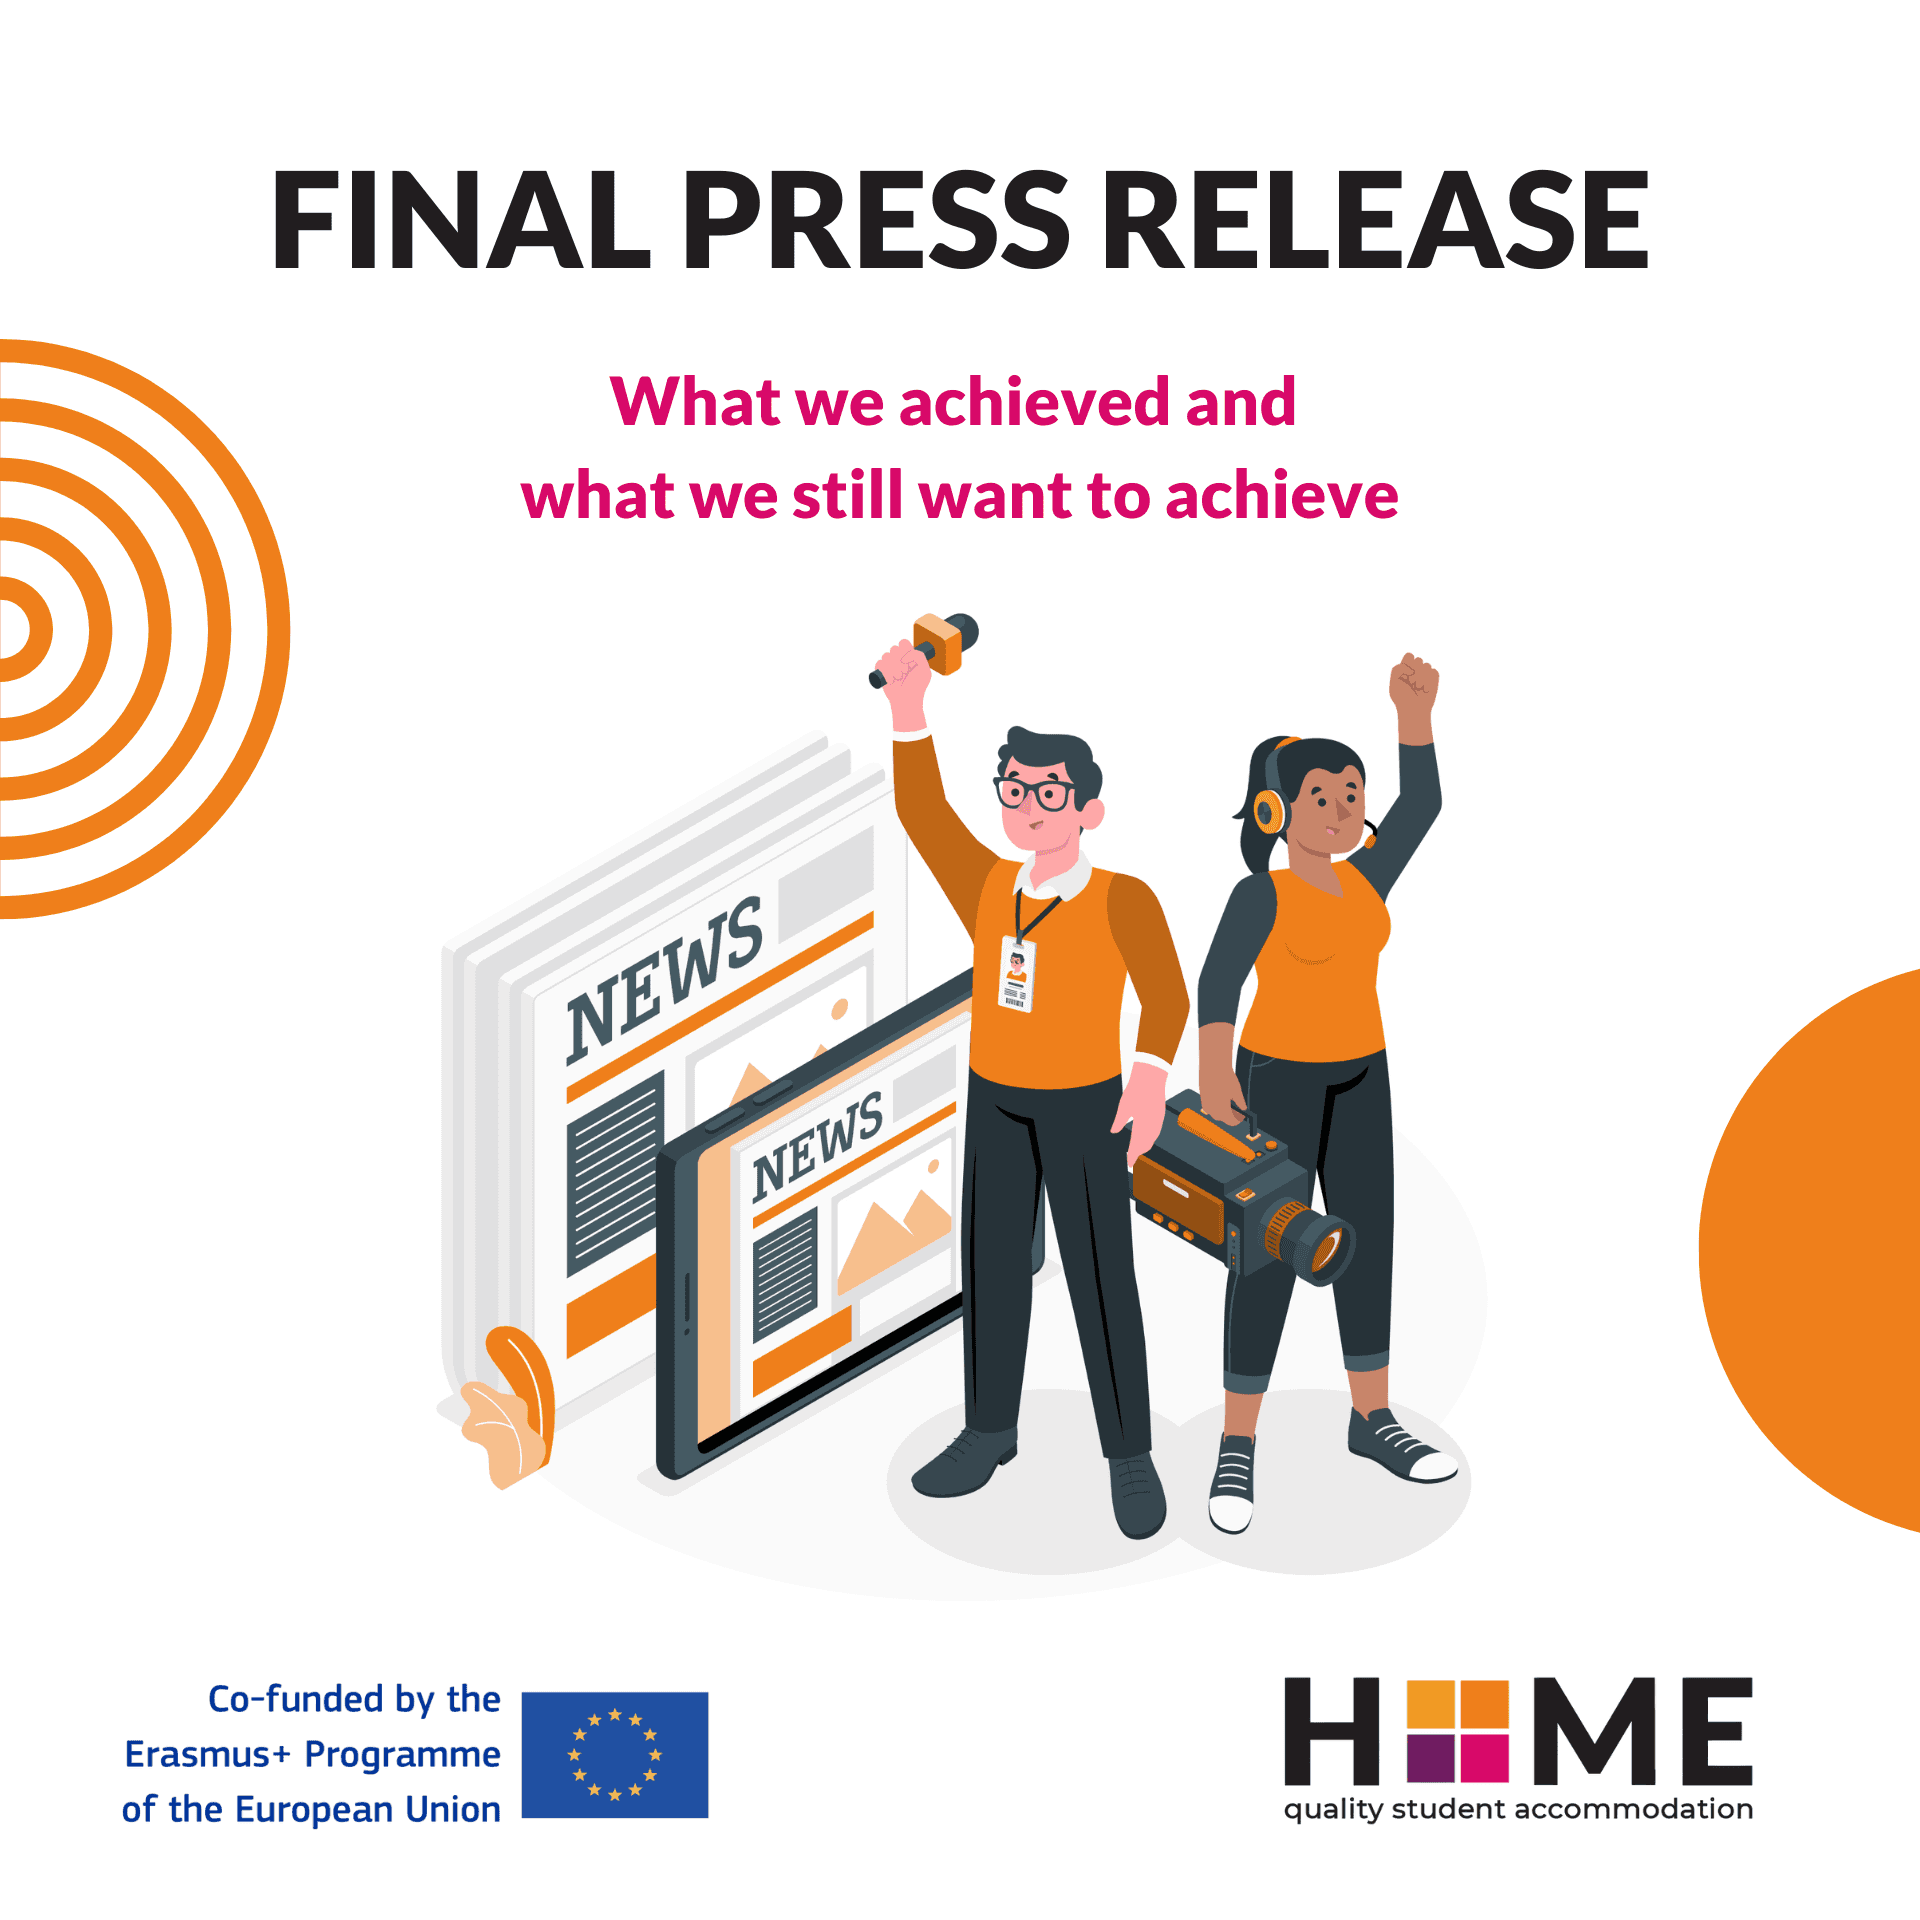 The HOME project’s final press release: what we achieved and what we still want to achieve